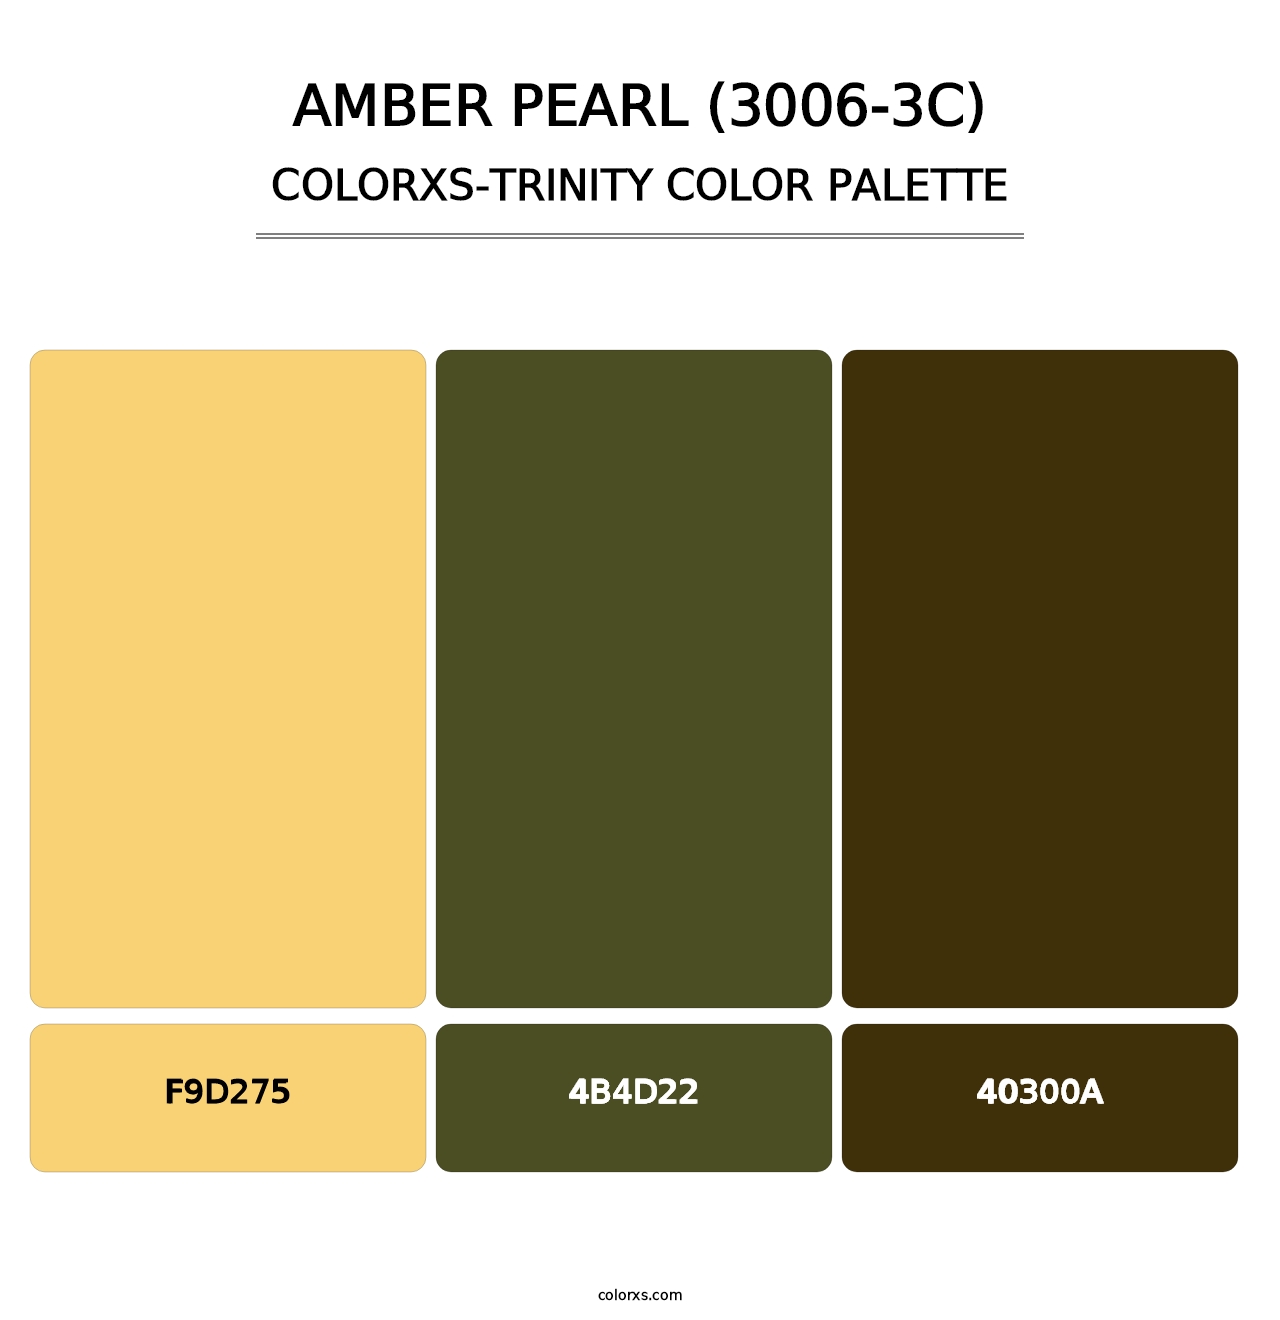 Amber Pearl (3006-3C) - Colorxs Trinity Palette